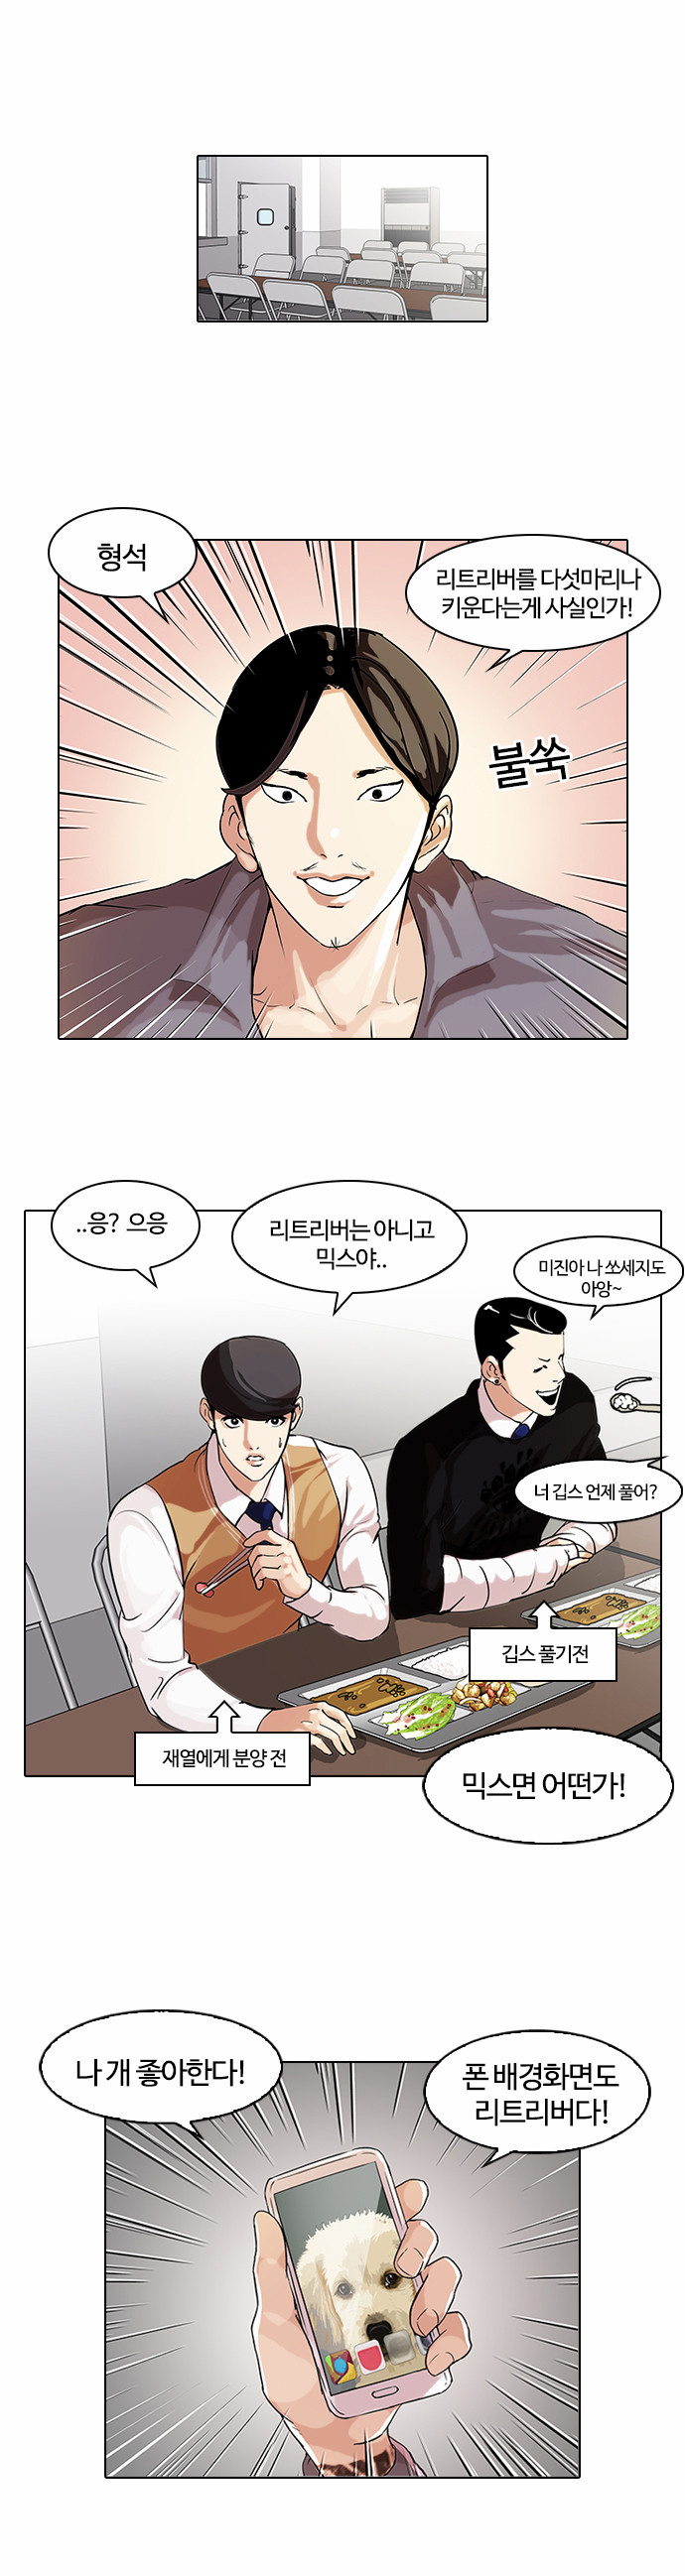 Lookism - Chapter 63 - Page 1